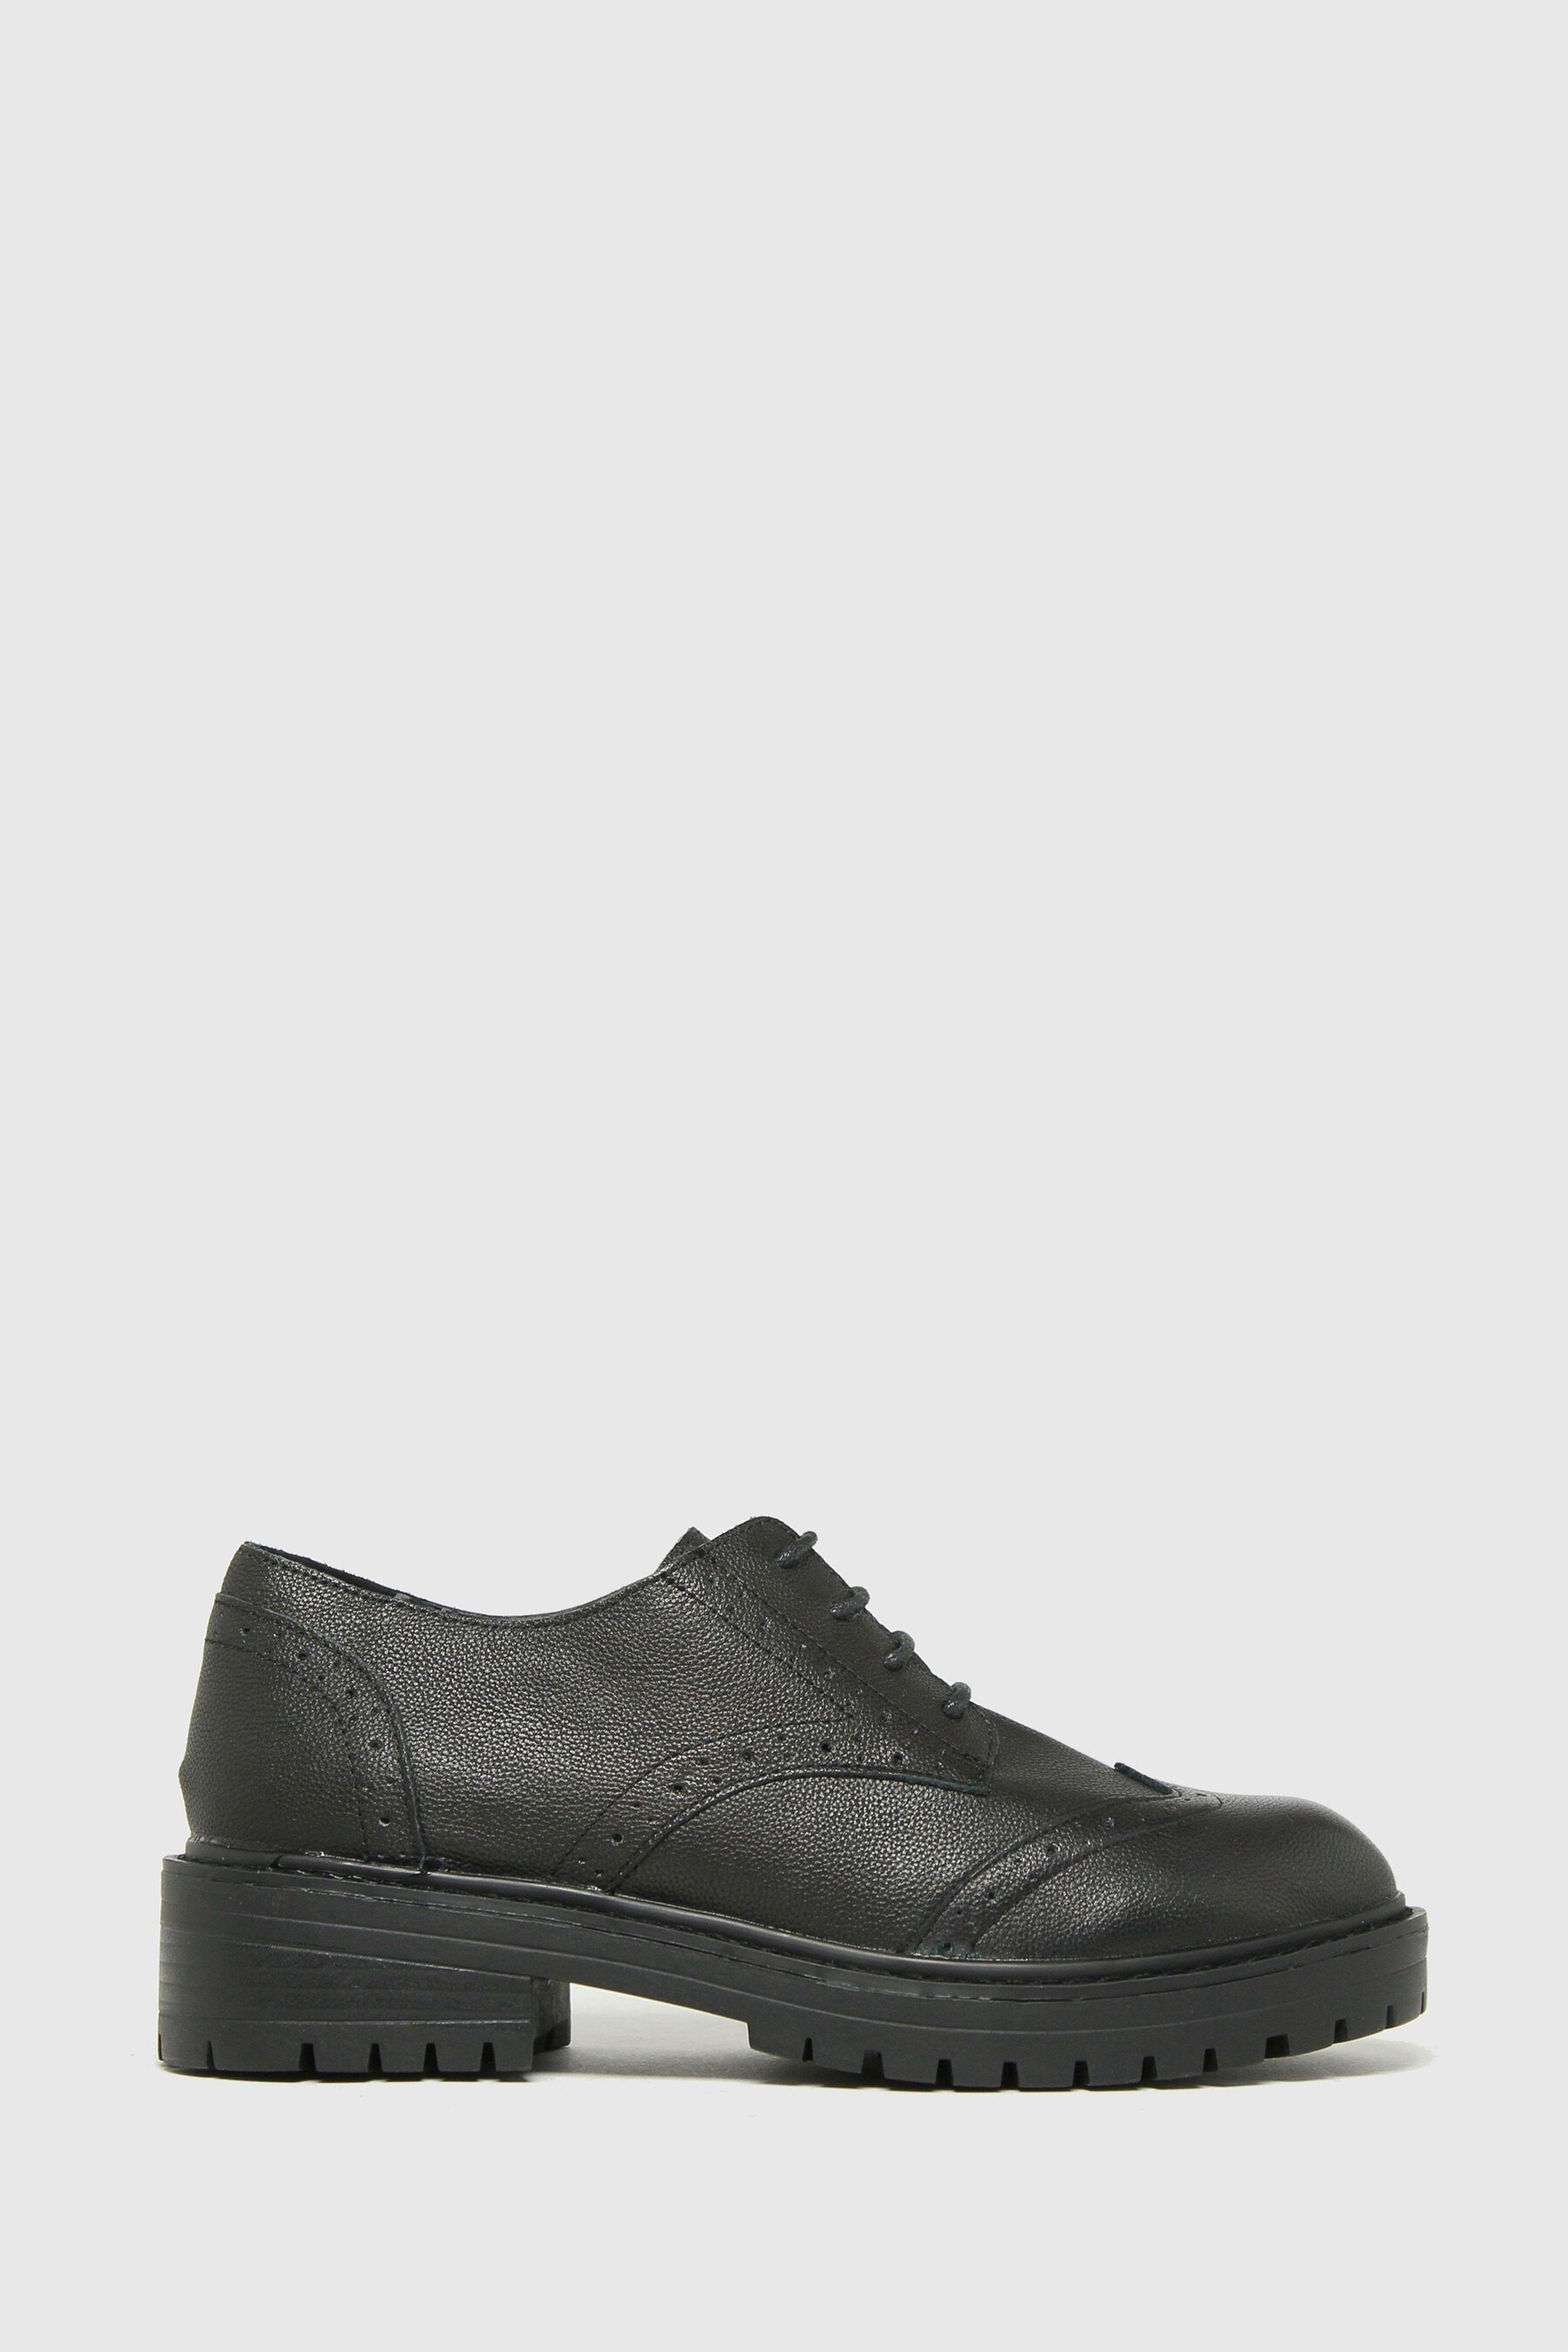 Buy Schuh Black Lois Leather Lace-Up Brogues from the Next UK online shop